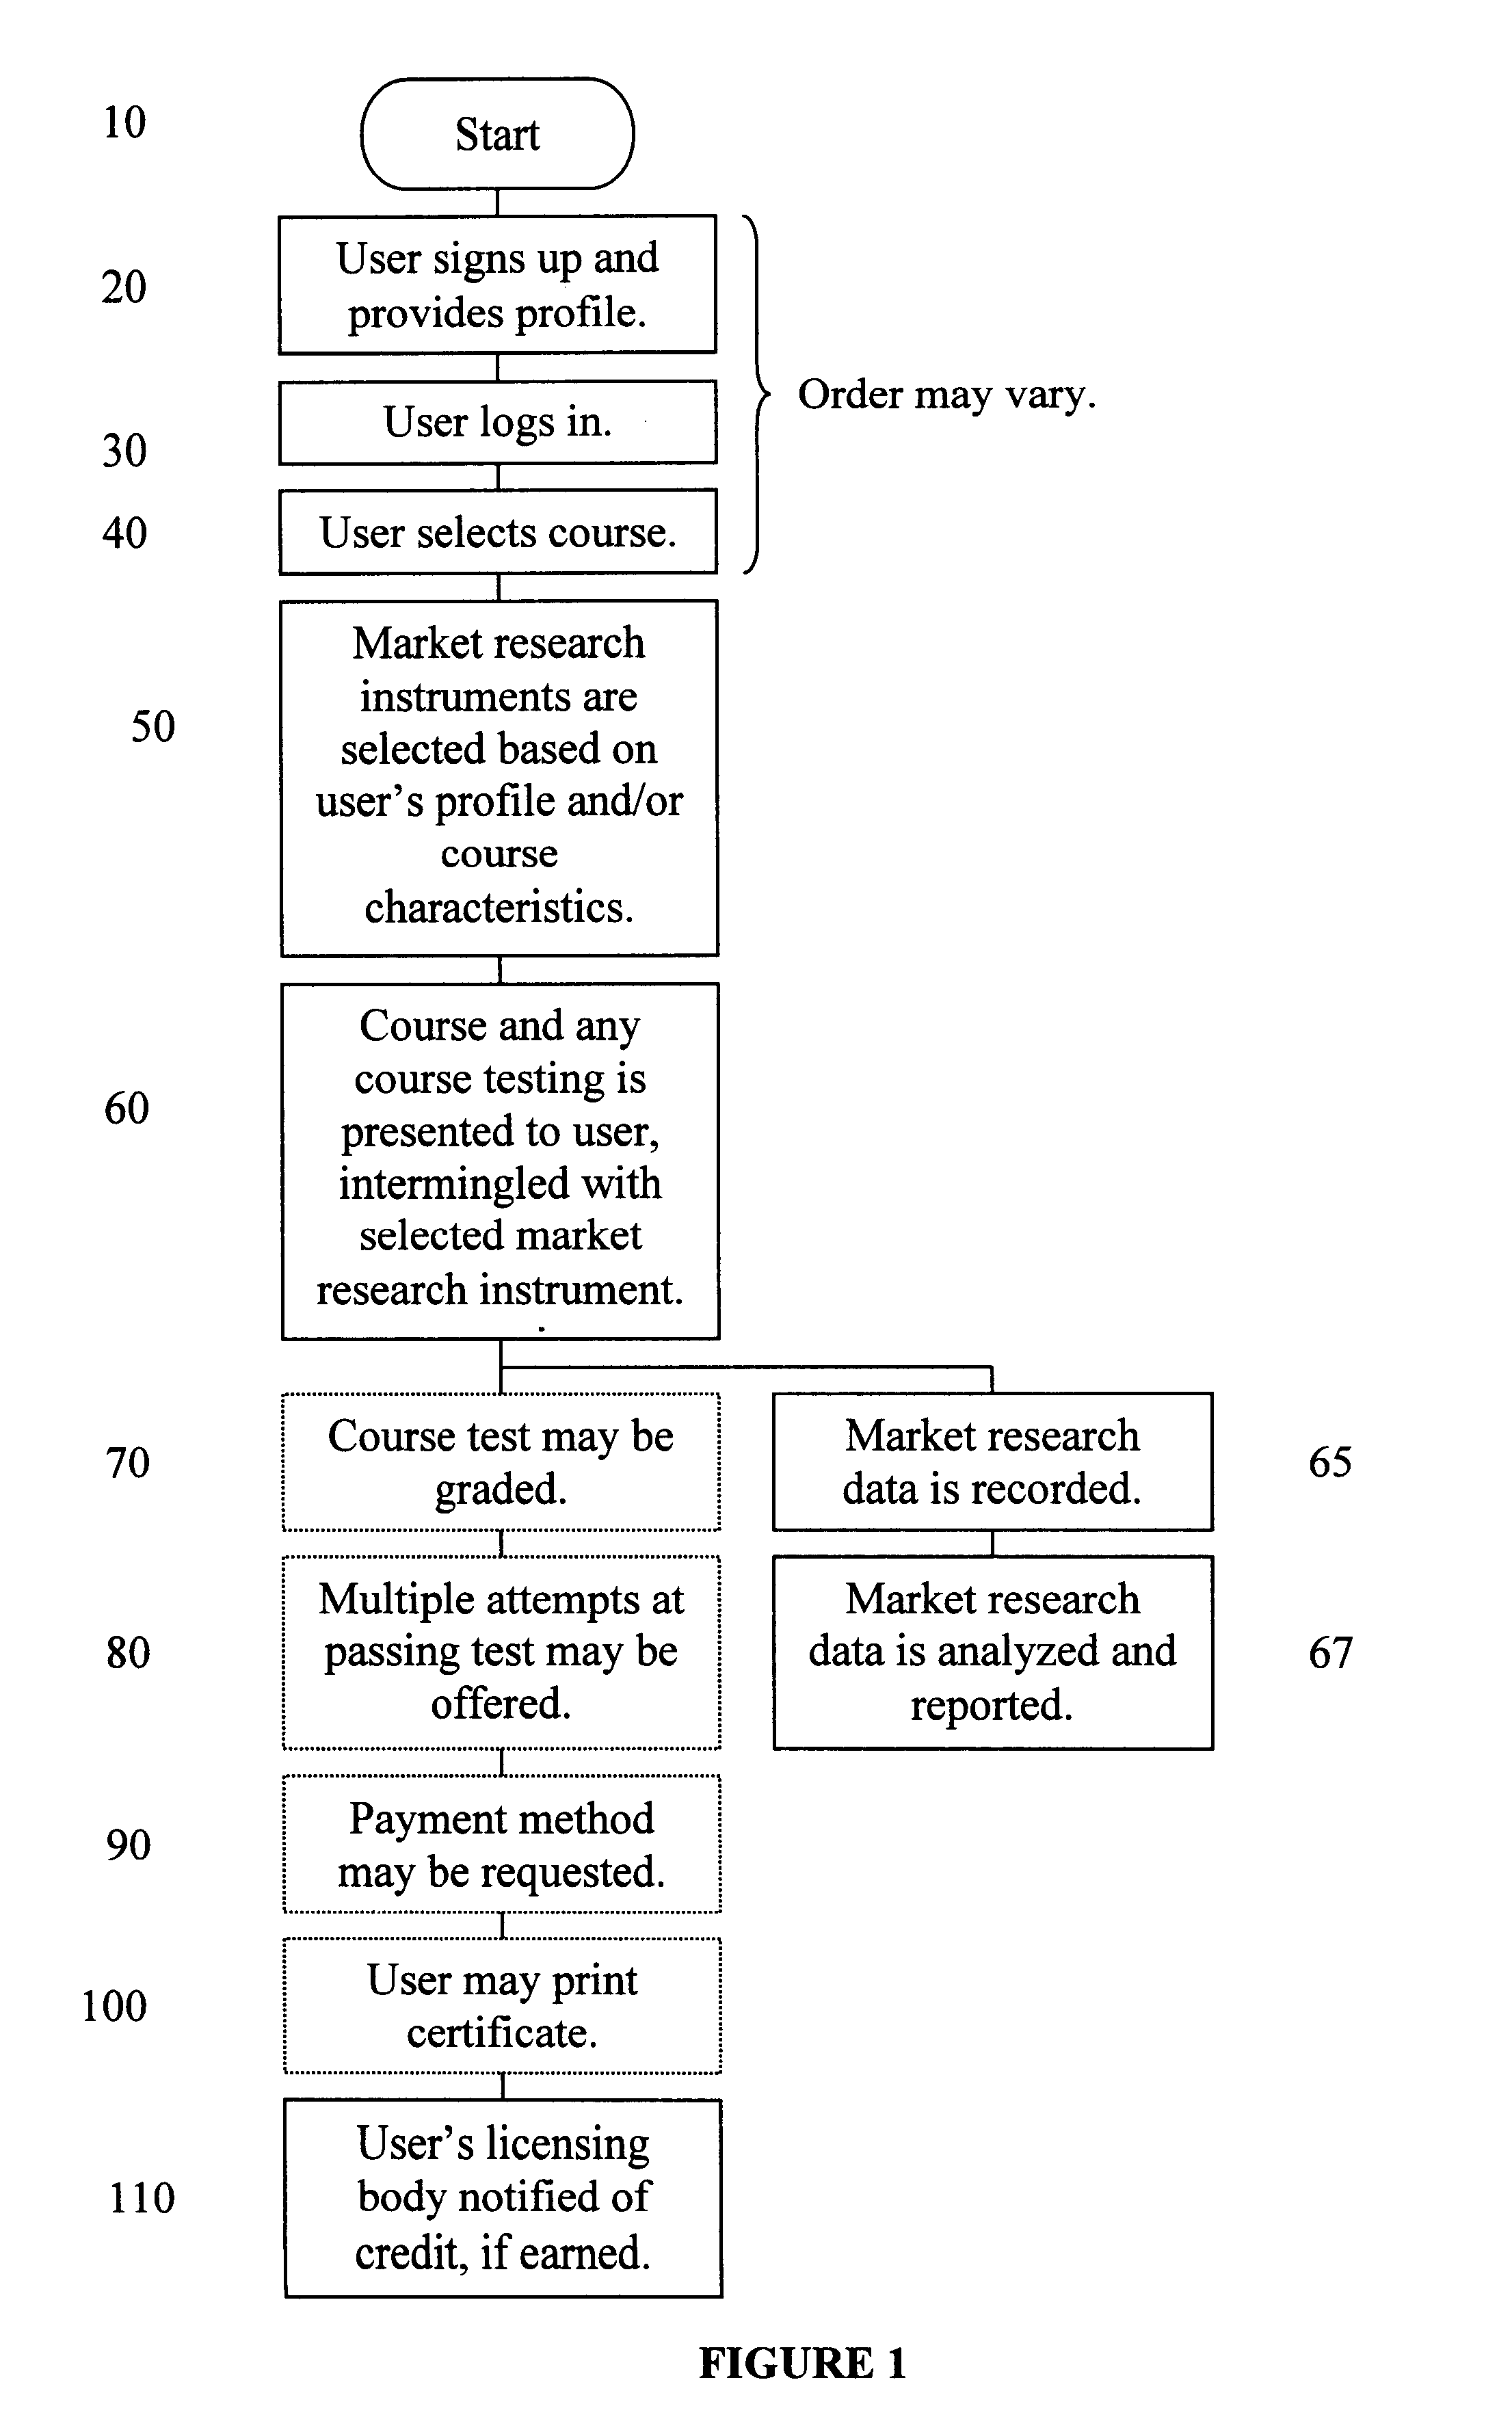 Method and apparatus for market research using education courses and related information